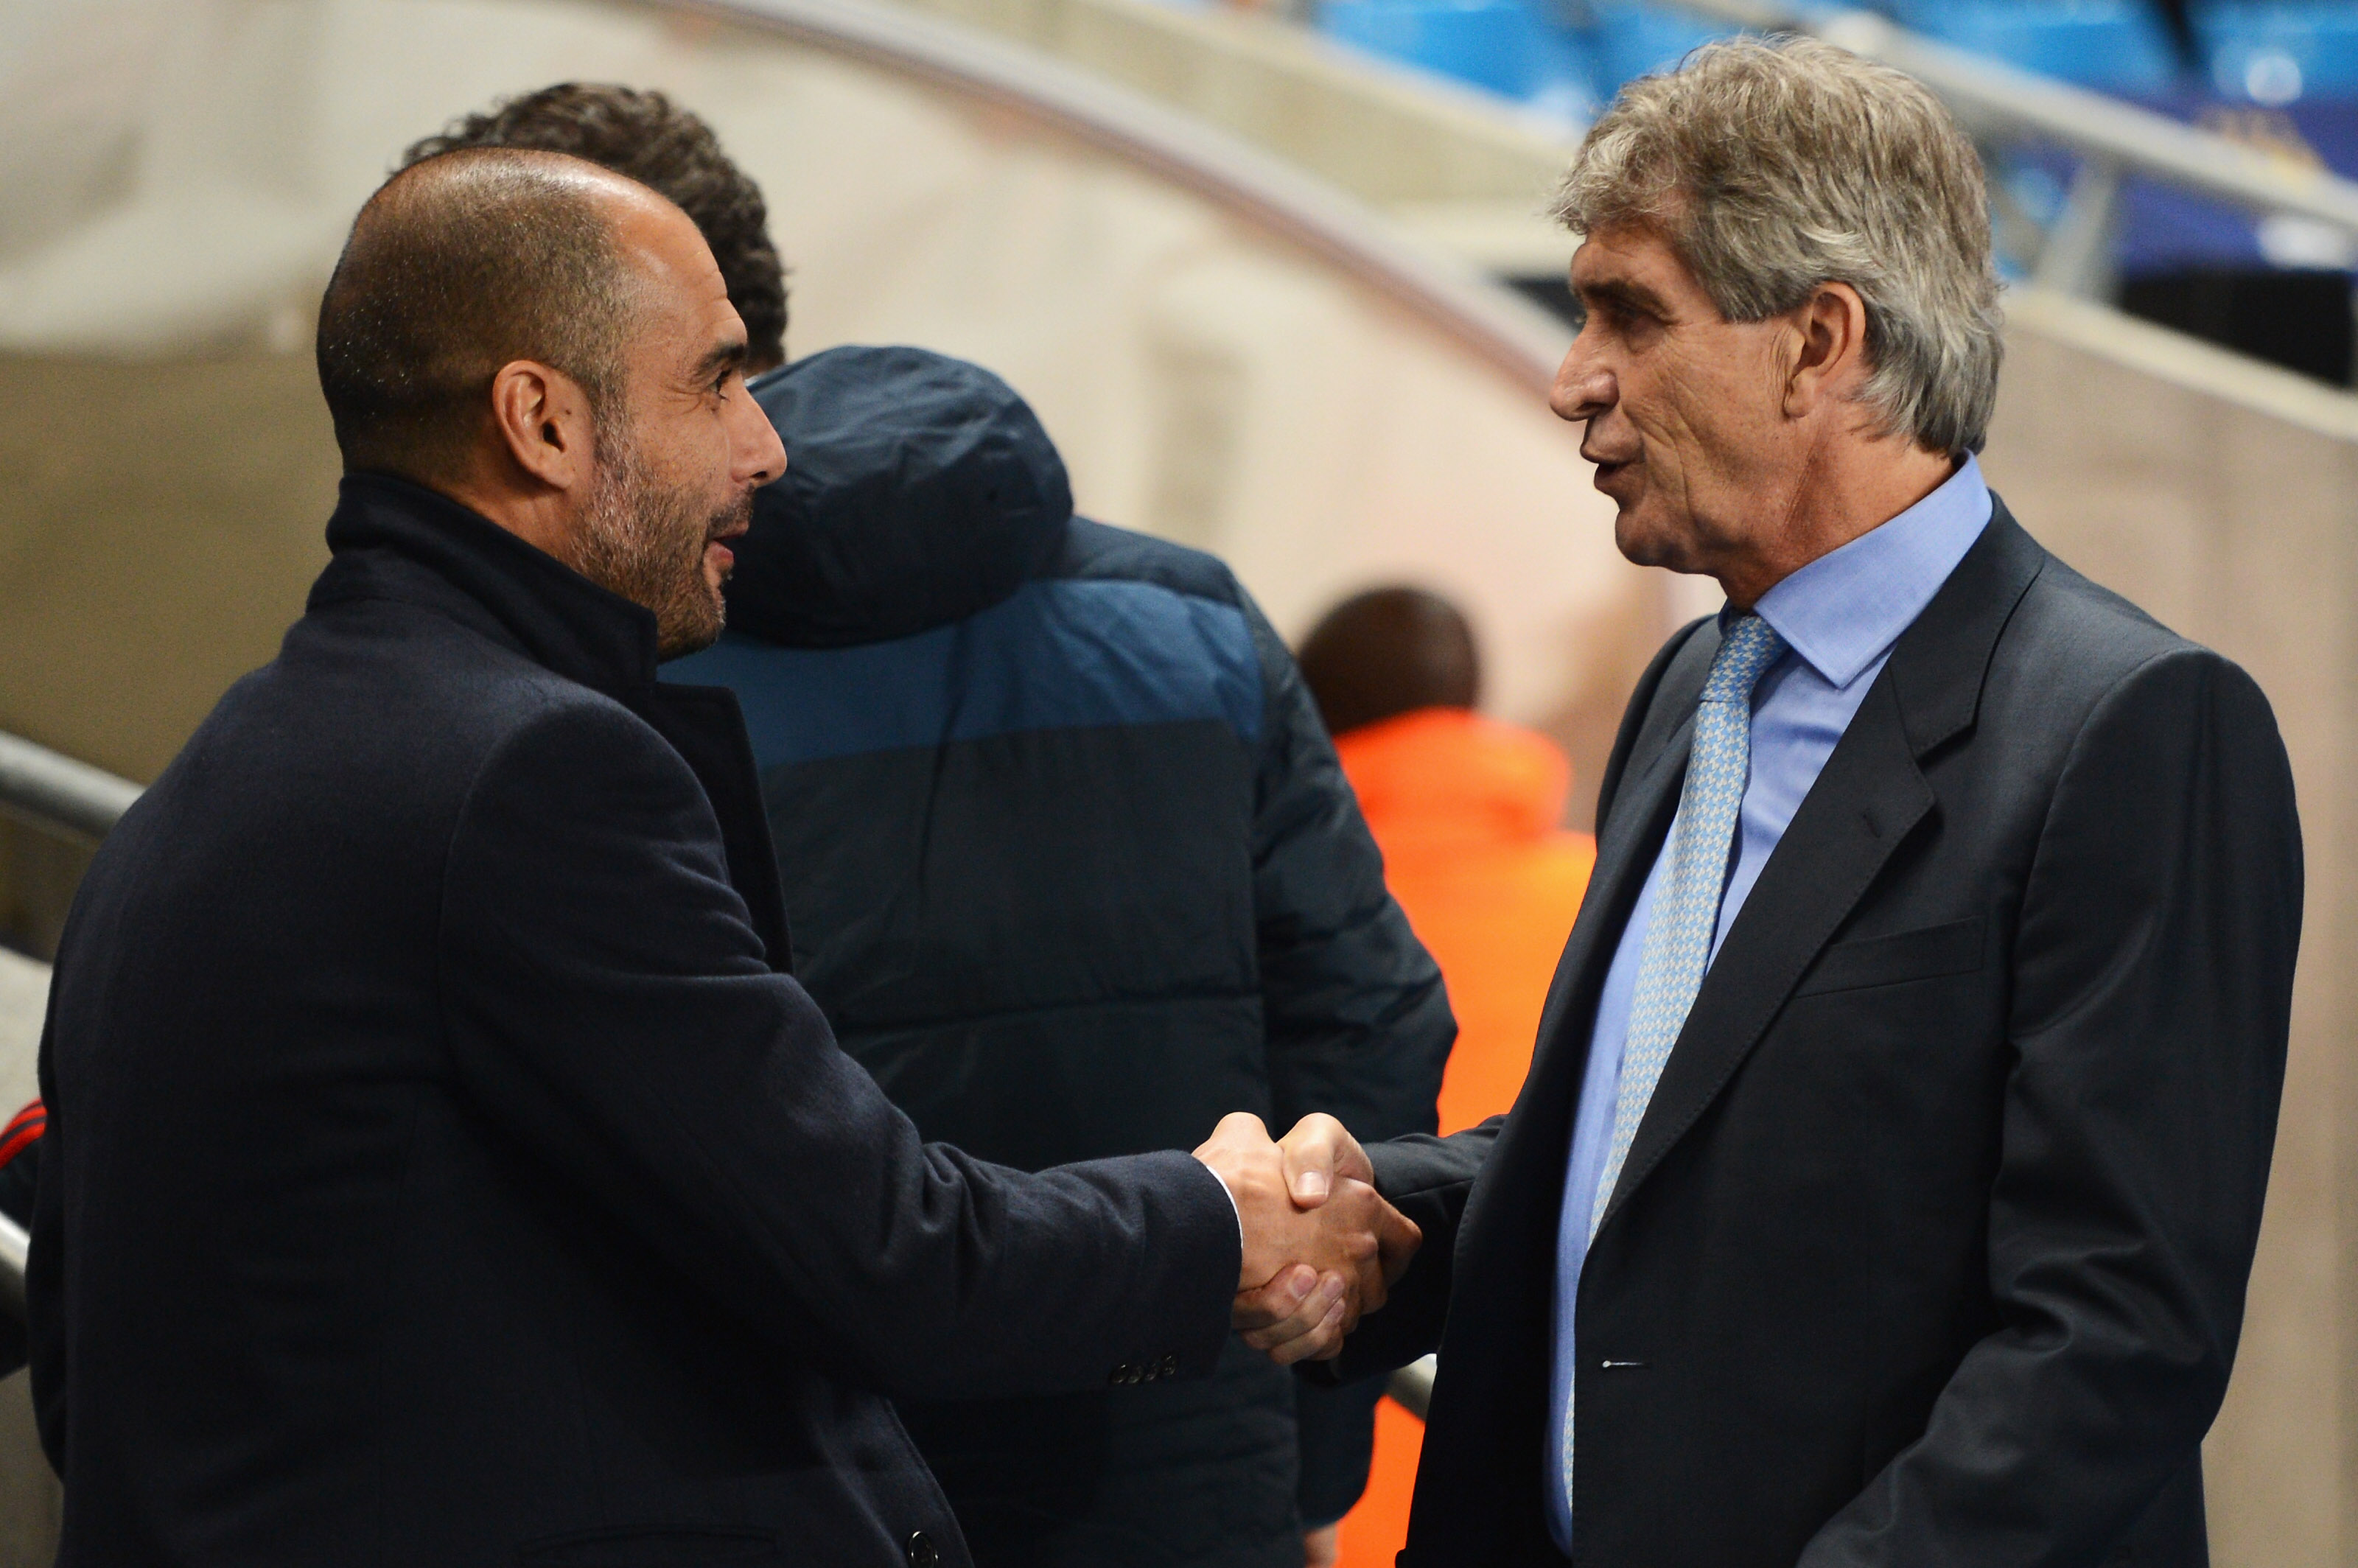 MANCHESTER, ENGLAND - OCTOBER 02:  Manuel Pellegrini (R), coach of Manchester City greets Josep Guardiola, coach of Muenchen during the UEFA Champions League Group D match between Manchester City and FC Bayern Muenchen at Etihad Stadium on October 2, 2013 in Manchester, England.  (Photo by Michael Regan/Bongarts/Getty Images)